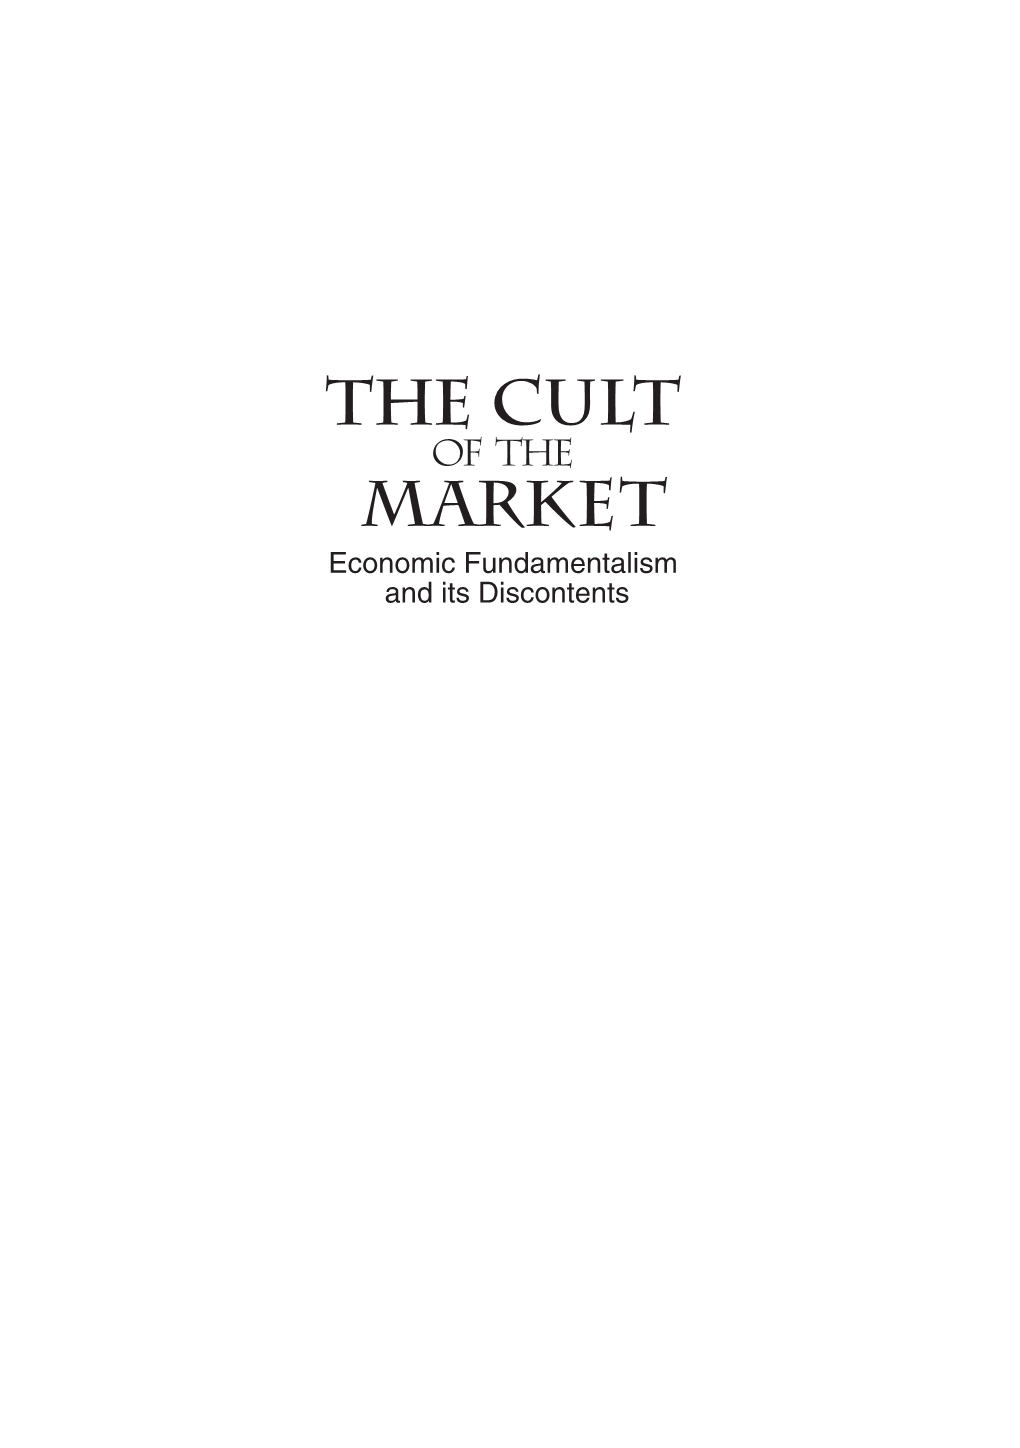 The Cult of the Market: Economic Fundamentalism and Its Discontents